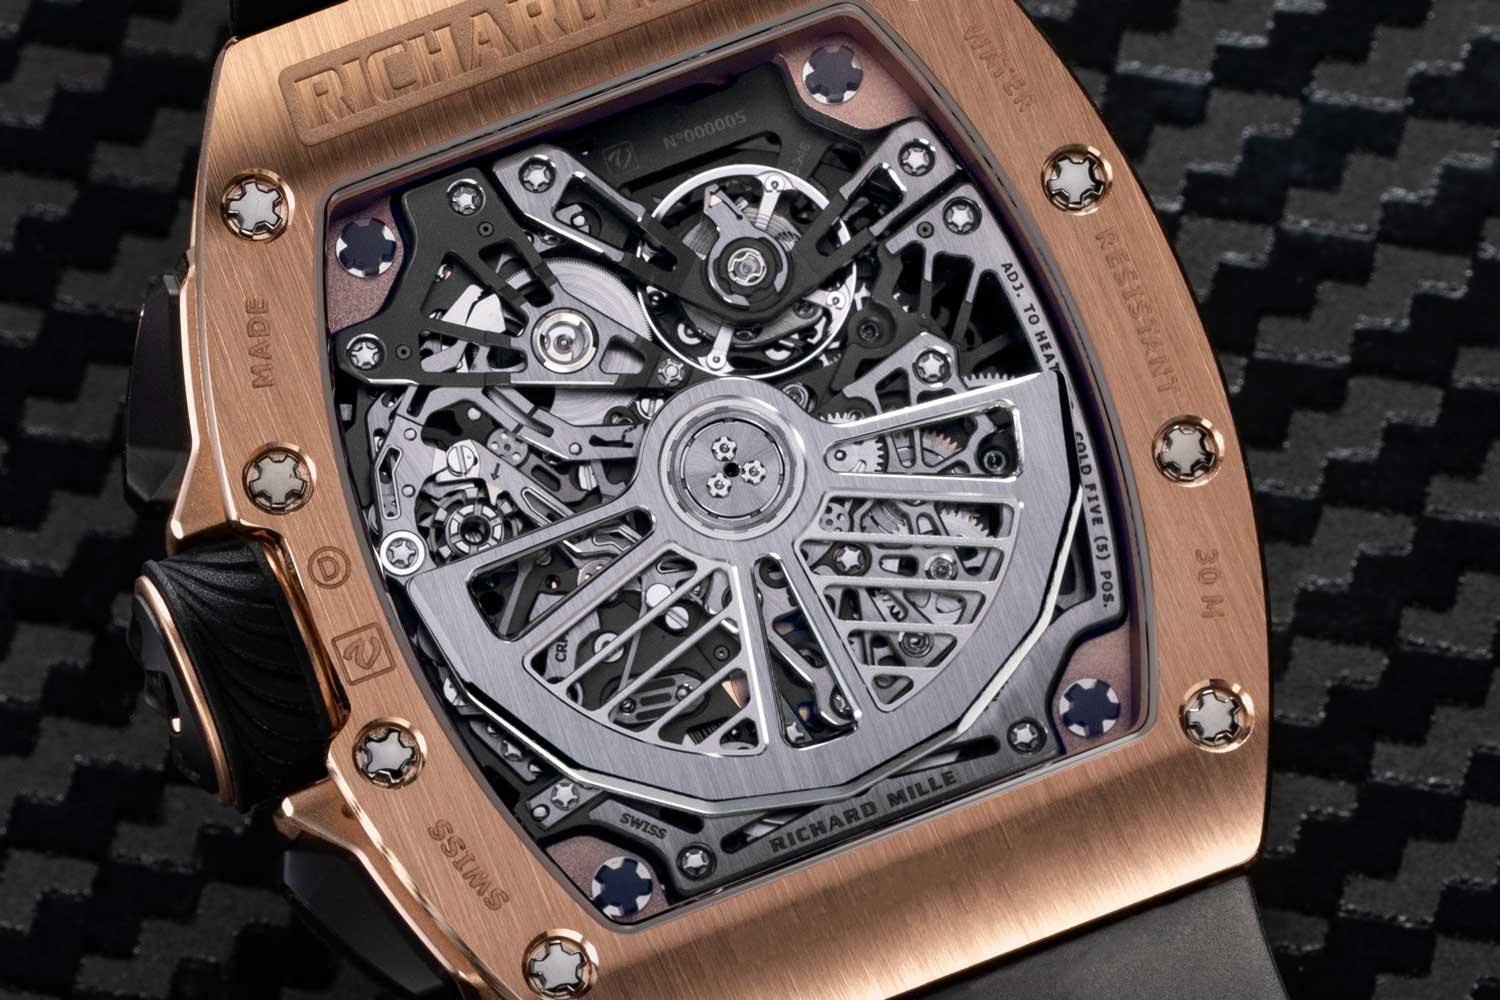 The RM 72-01 is powered by the CRMC1 movement (Caliber Richard Mille Chronograph 1), which also happens to be Richard Mille's full in-house movement and the world's first chronograph movement with two oscillating pinions (©Revolution)